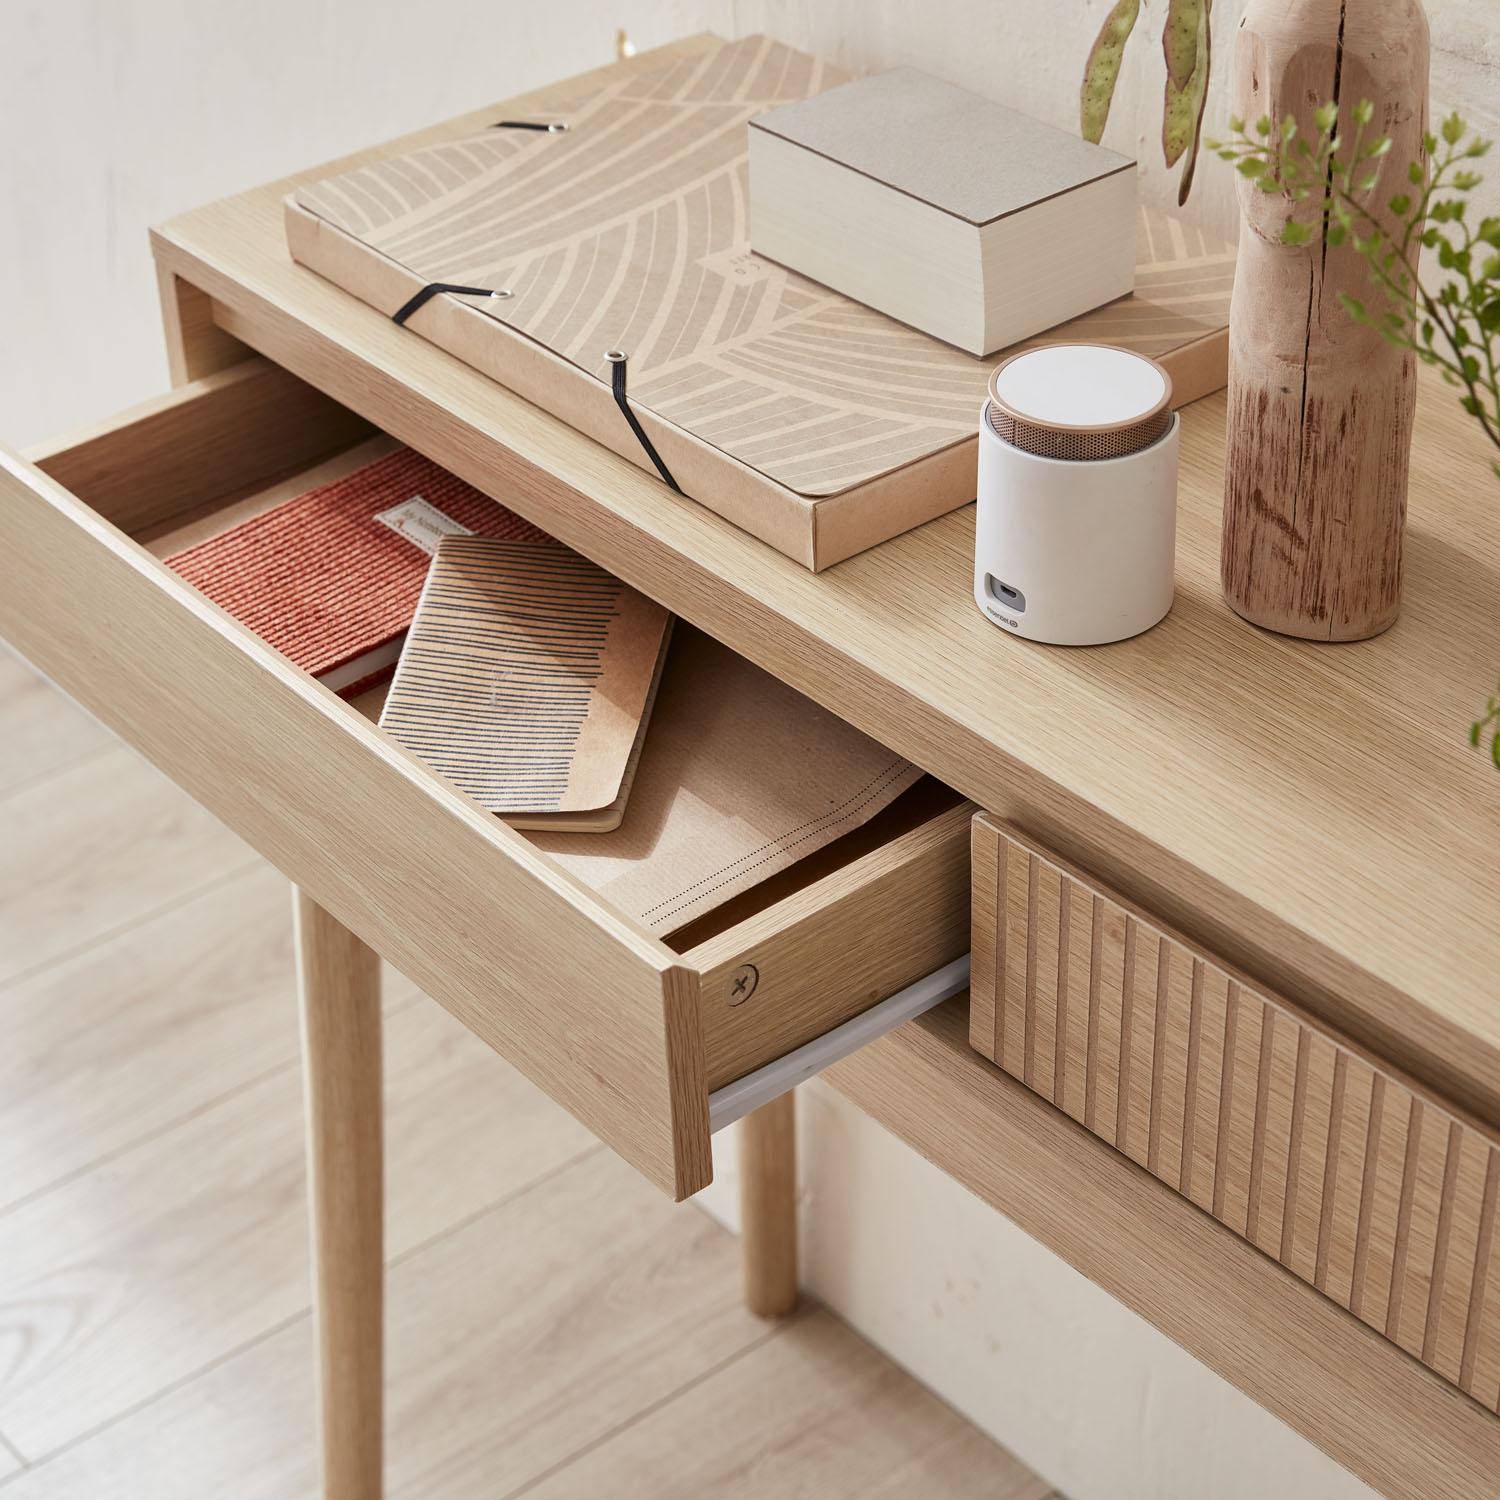 Grooved wood detail console table, 100x30x75cm, Linear, Natural wood colour,sweeek,Photo2